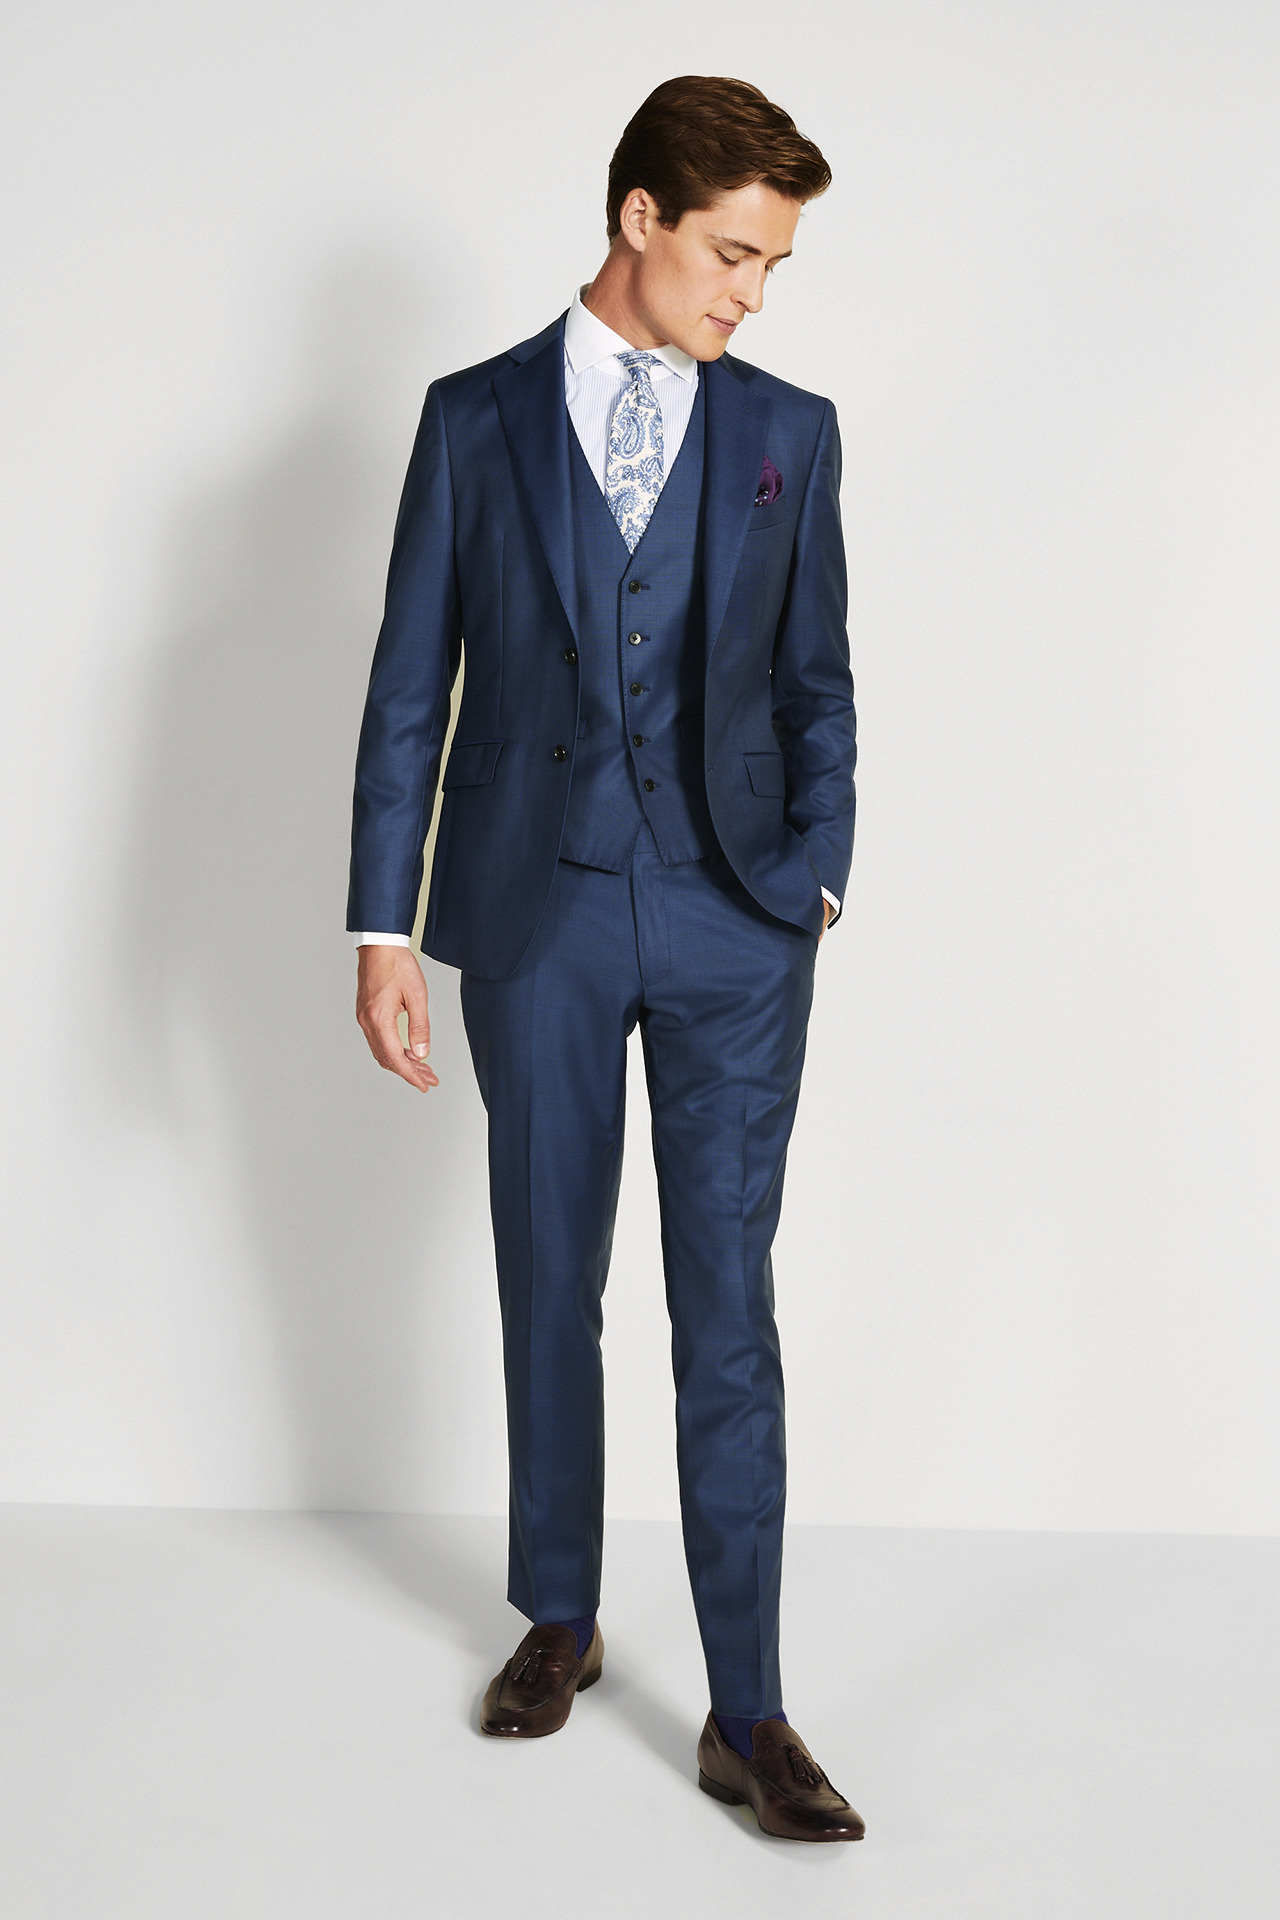 semi-formal attire: three-piece navy suit, white shirt and blue floral tie